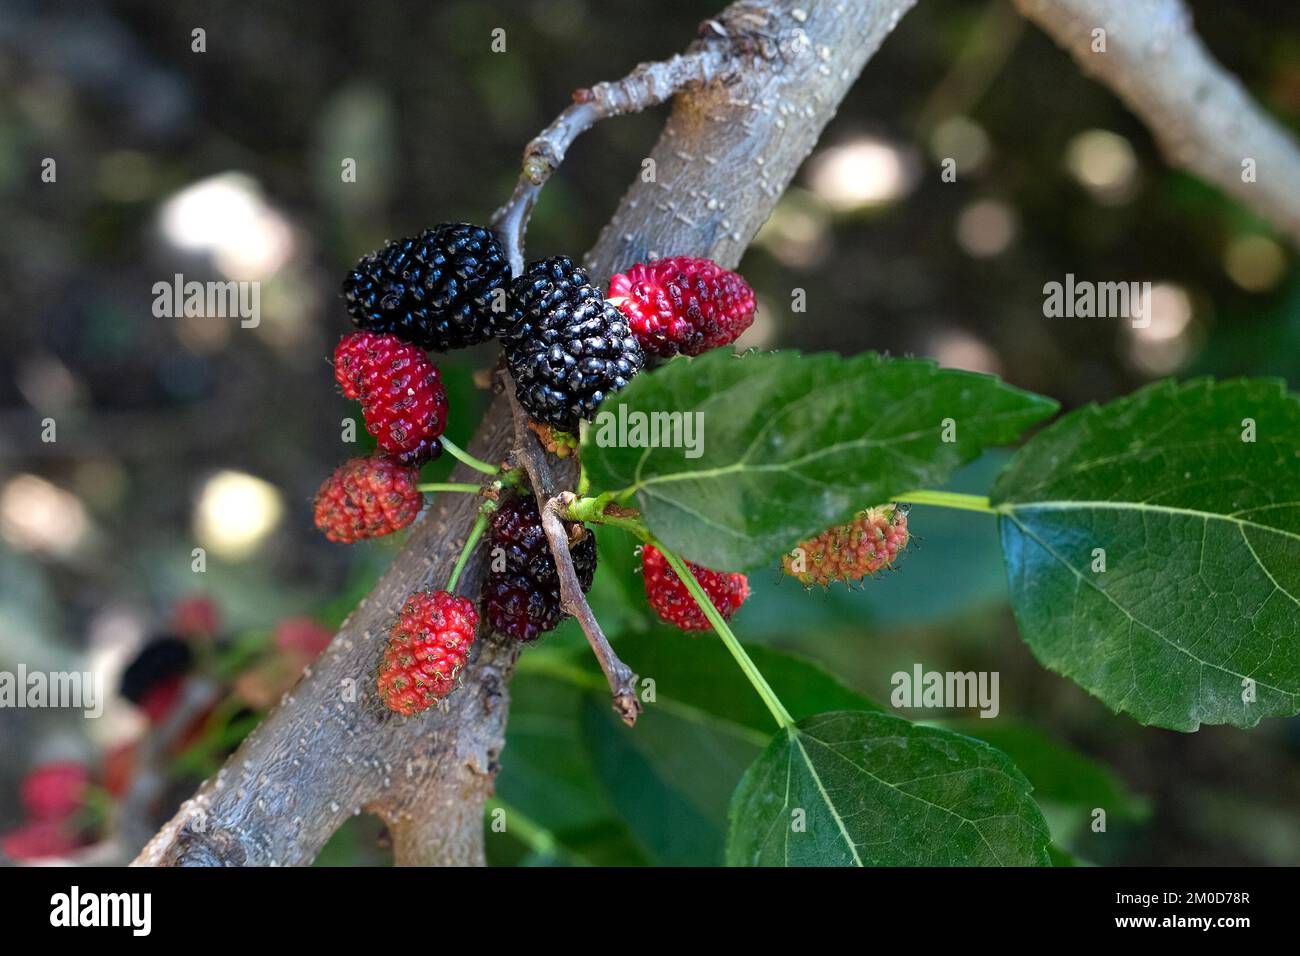 Sunlight on ripe mulberry berries growing on branch with green leaves. Agricultural plant with fruits in garden outdoors. blackberry in forest. Raw Stock Photo